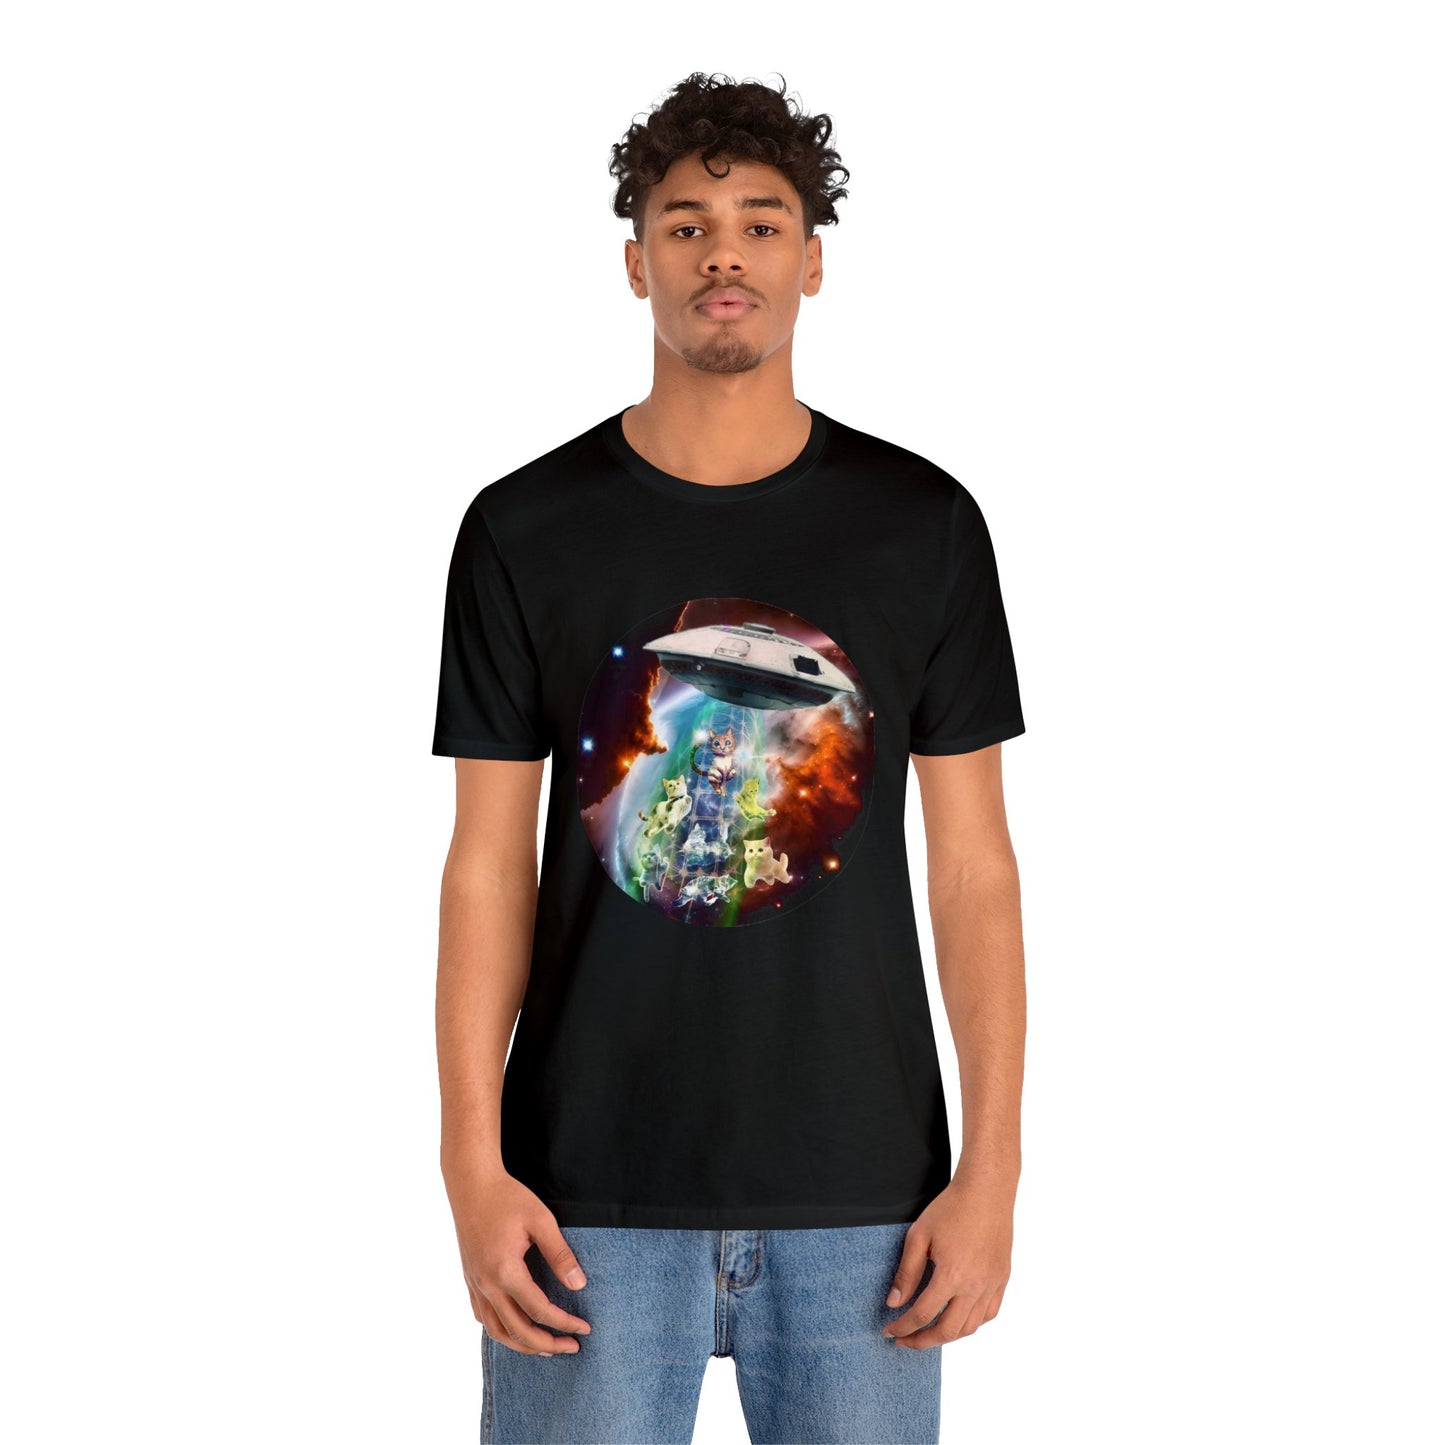 CATS IN SPACE Tee